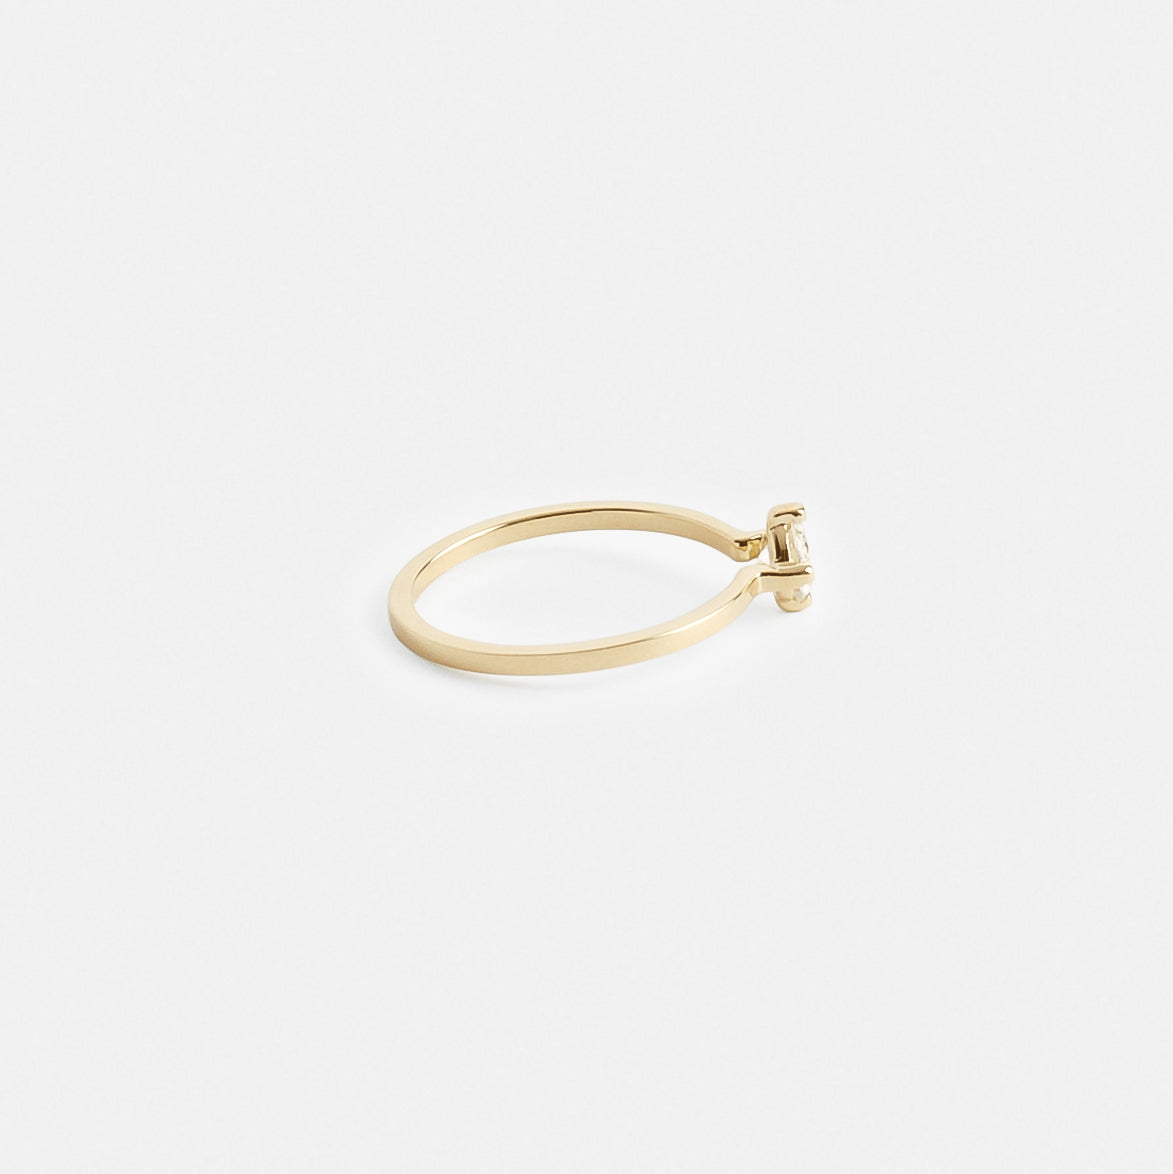 Mini Thin Ema Ring in 14k Gold set with a 0.4ct round brilliant cut natural diamond By SHW Fine Jewelry NYC